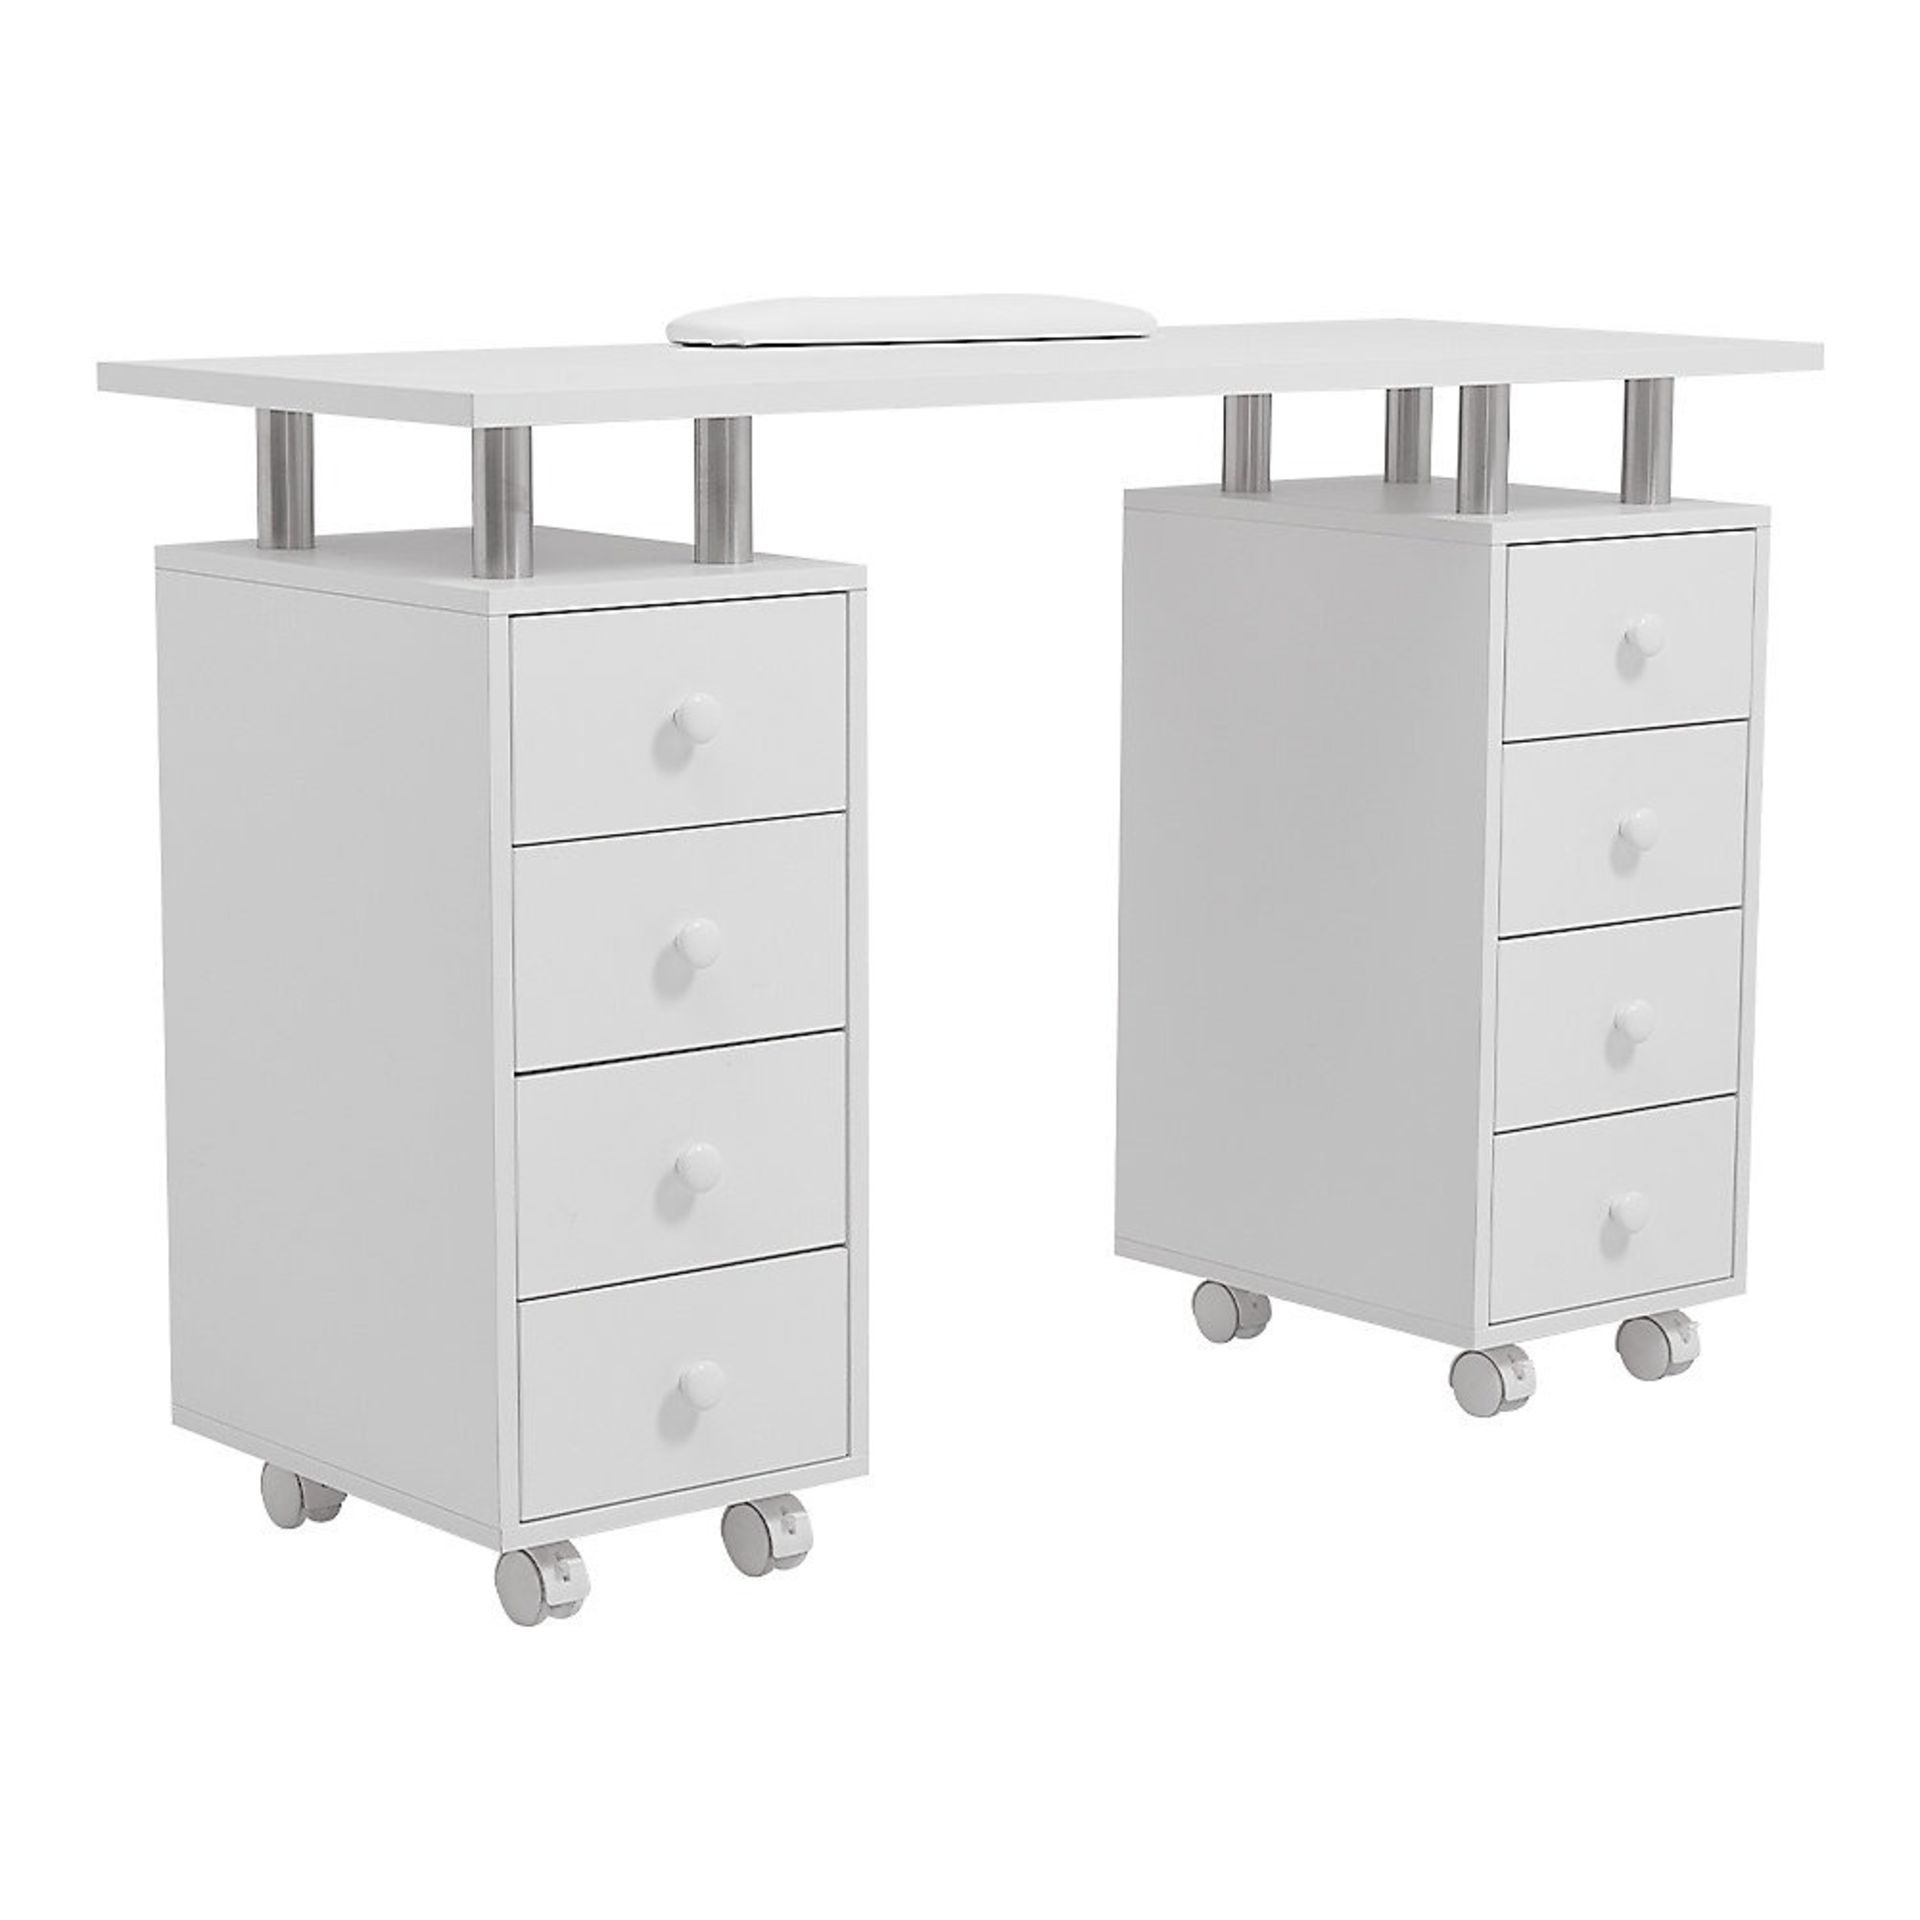 8 Drawers White Professional Manicure Station on Whells RRP £175.00 (LOCATION H/S 5.5.2)